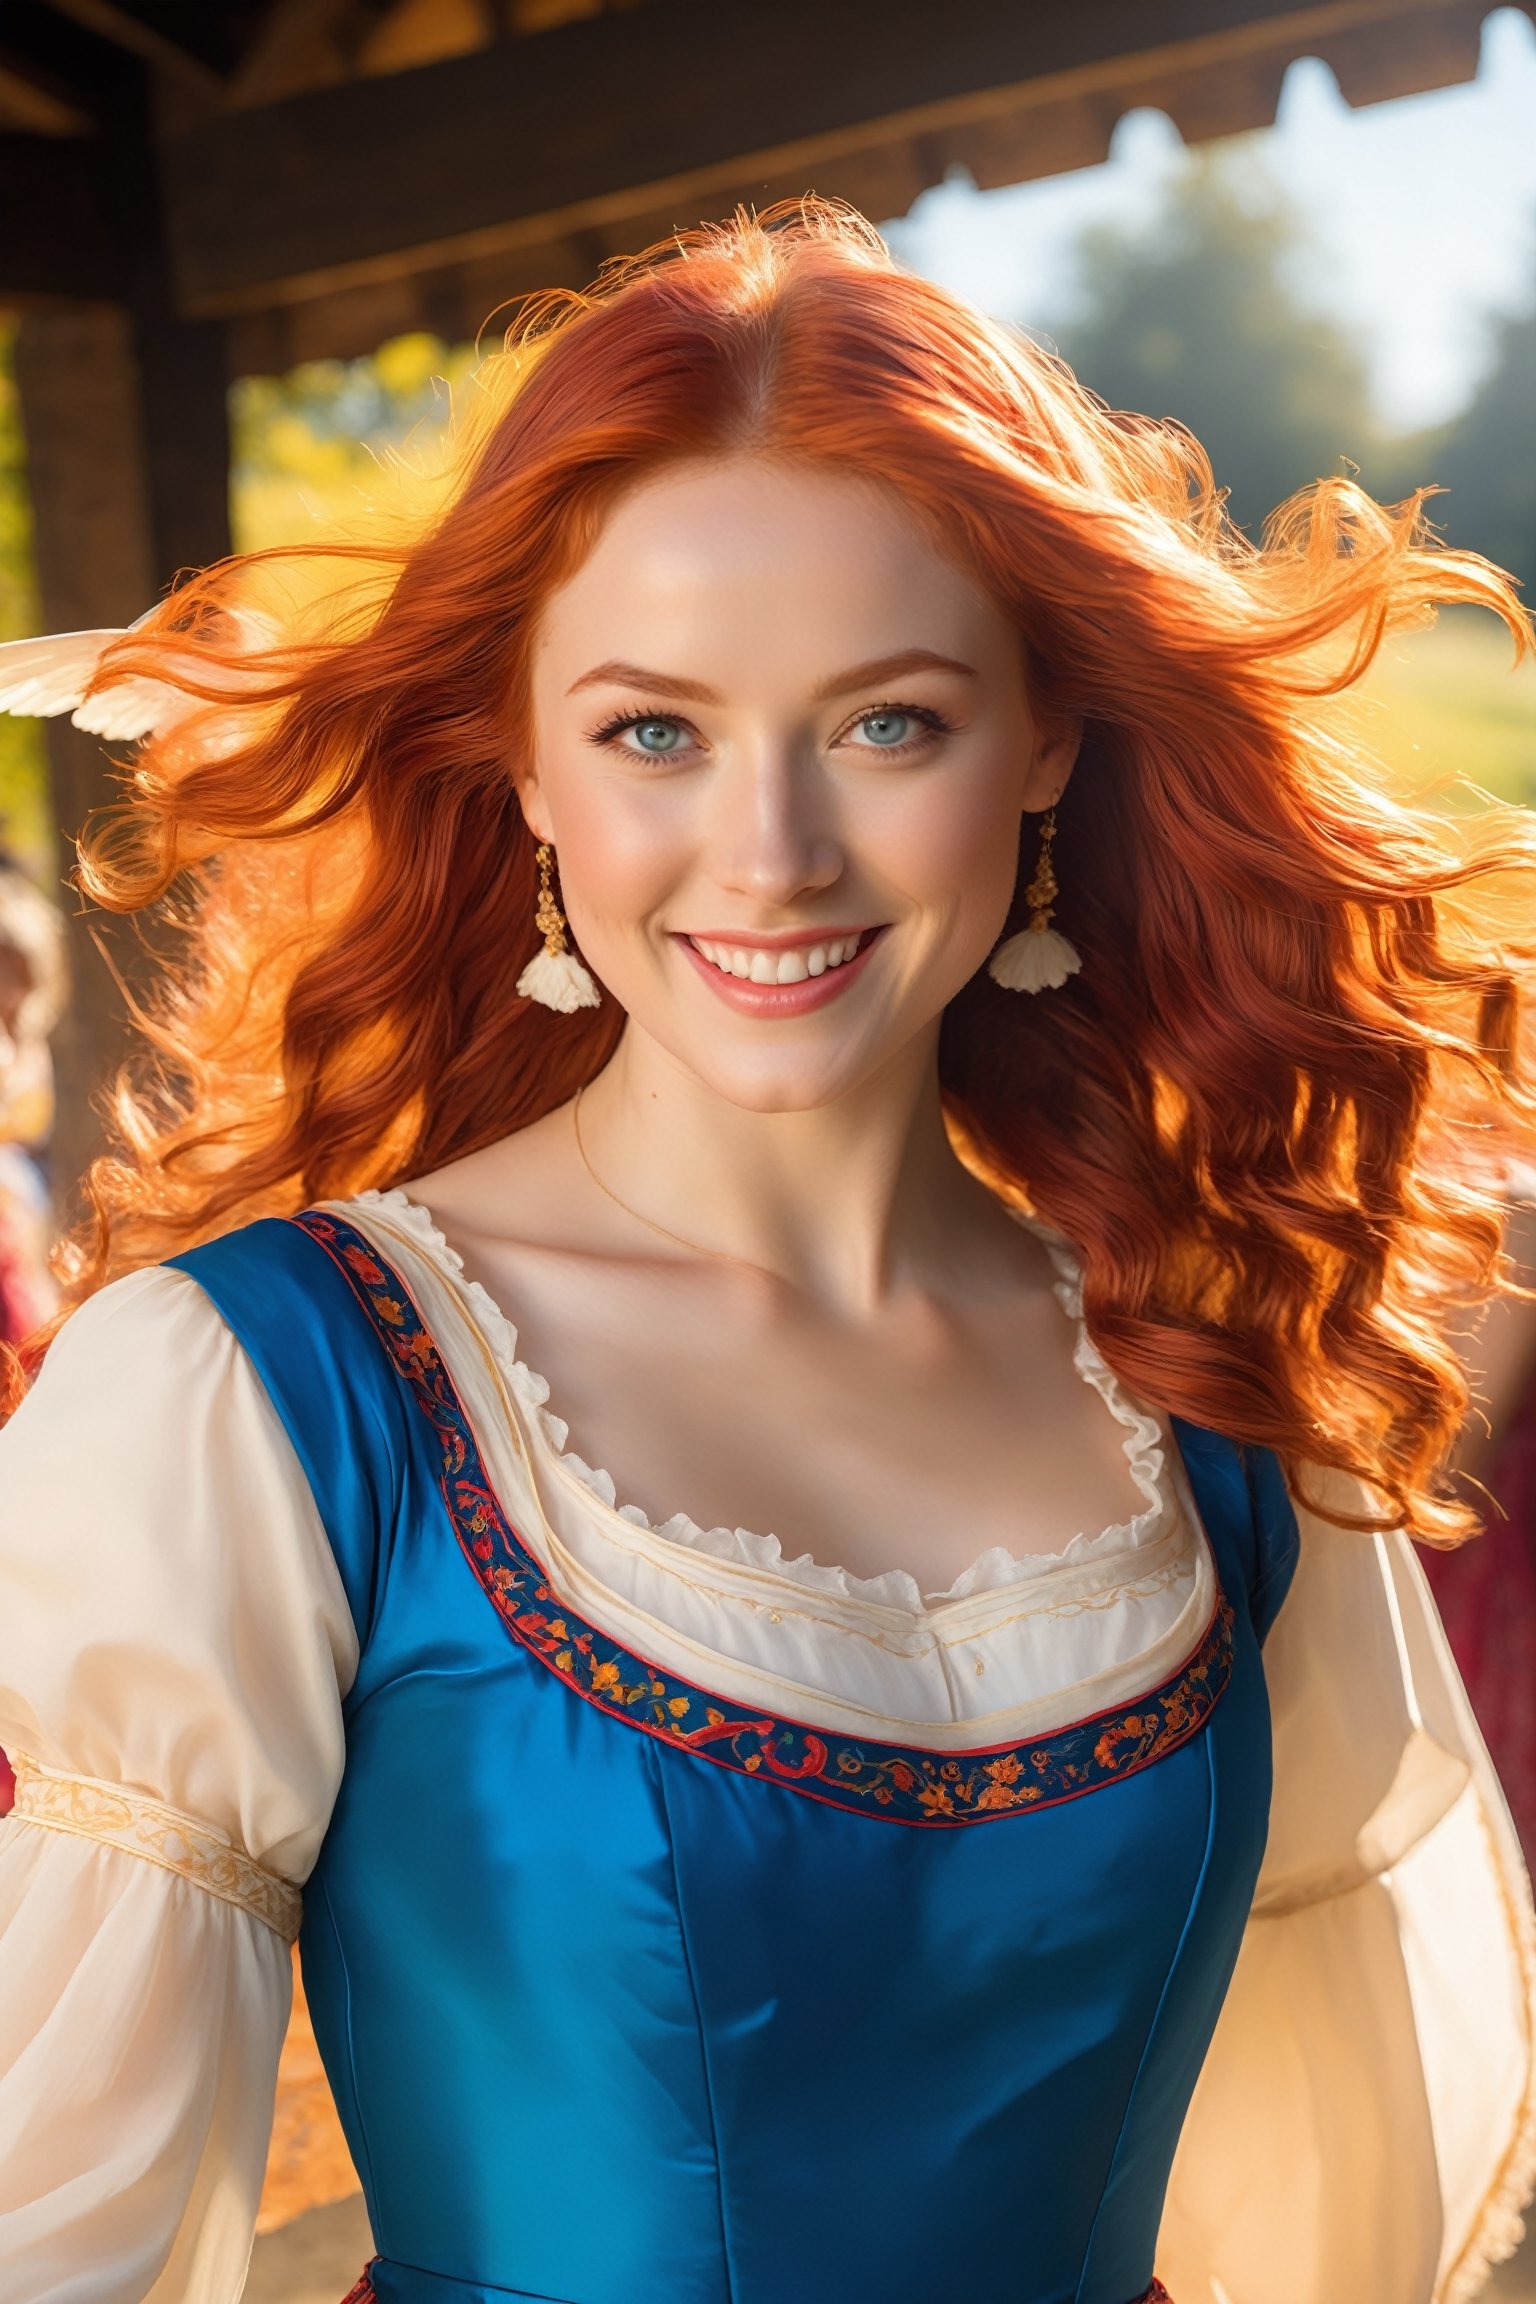 Pictures of a 25-year-old red-haired angel, with a warm,((angel wongs)), happy expression and big blue eyes gazing straight at the viewer, She has a warm, happy expression on her face and large blue eyes that look straight at the viewer. She is dancing in a traditional folkloric dress at a village festival on a sunny day, The viewer has the impression of being her dancing partner, Sunlight rays penetrate the scene created by ray-tracing, giving the sunlight a realistic effect. The background is slightly blurred to focus on her facial expressions and the details of her dress. The lighting is natural and bright, enhancing the cheerful atmosphere,18thcentury,photo_b00ster,bj_Devil_angel,An angel 